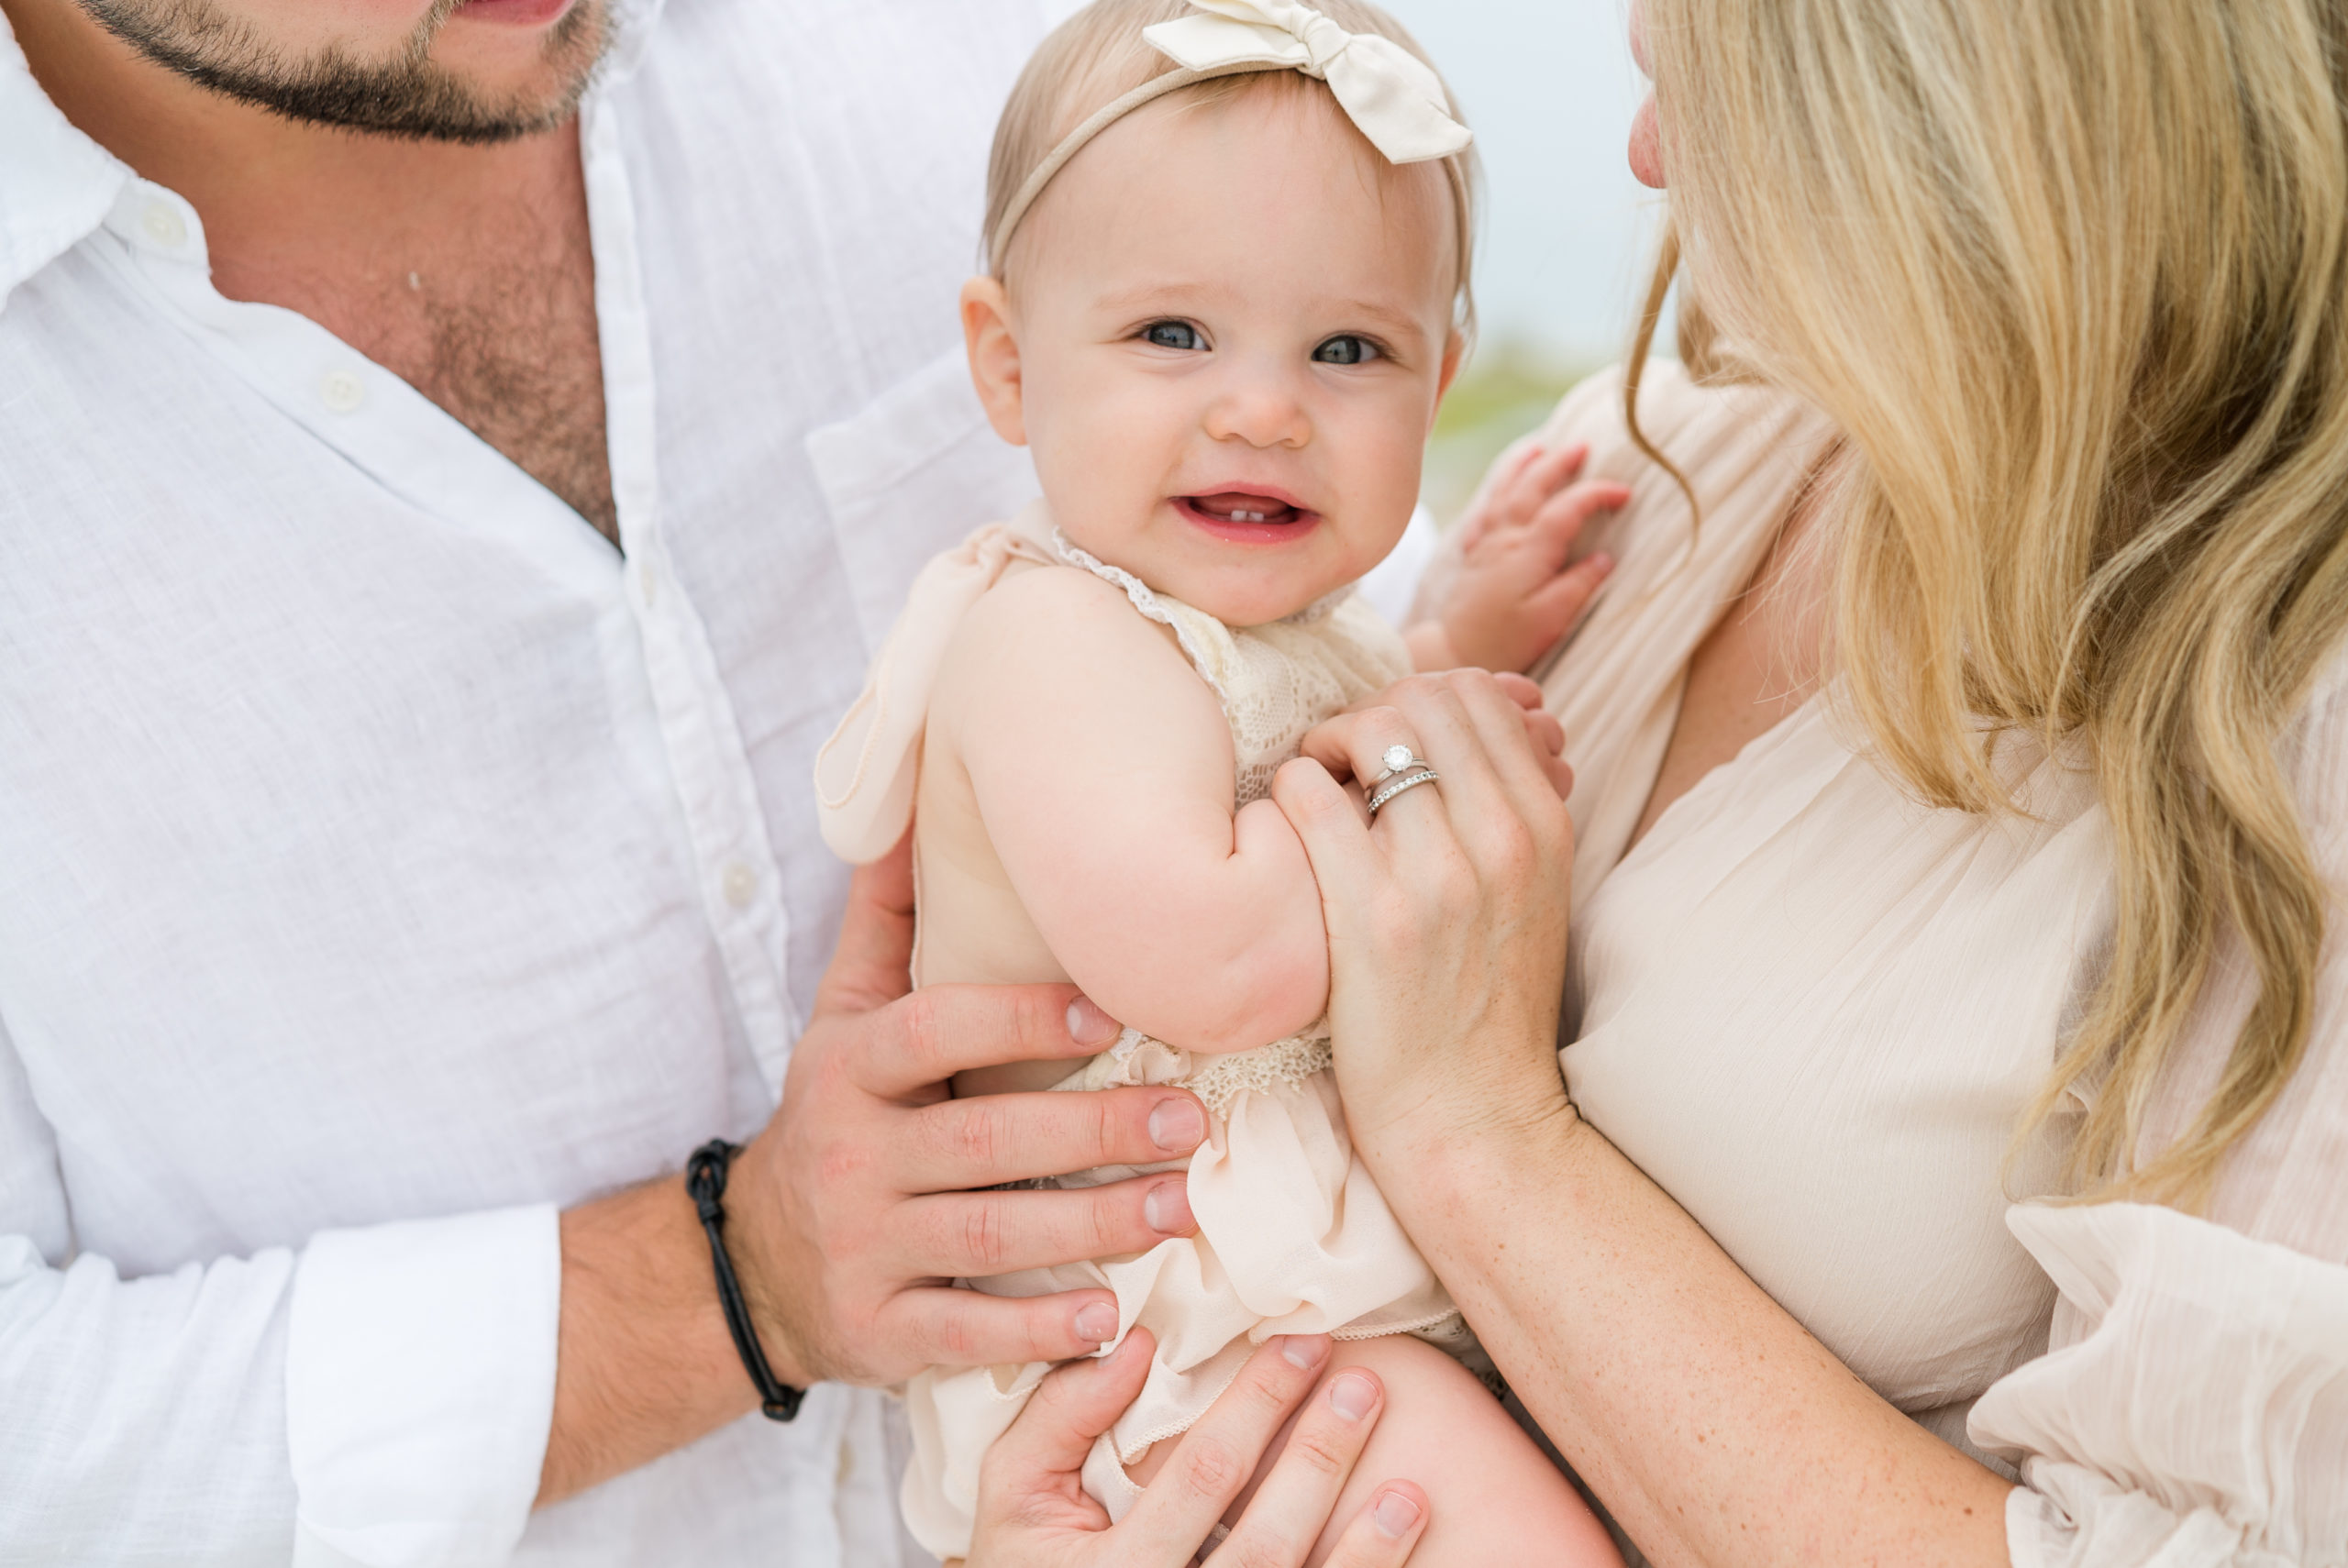 Olivia 9 Months Old - Sweet Williams Photography is a lifestyle, engagement, and wedding photographer serving the Nashville, Tennessee area, and destination locations.